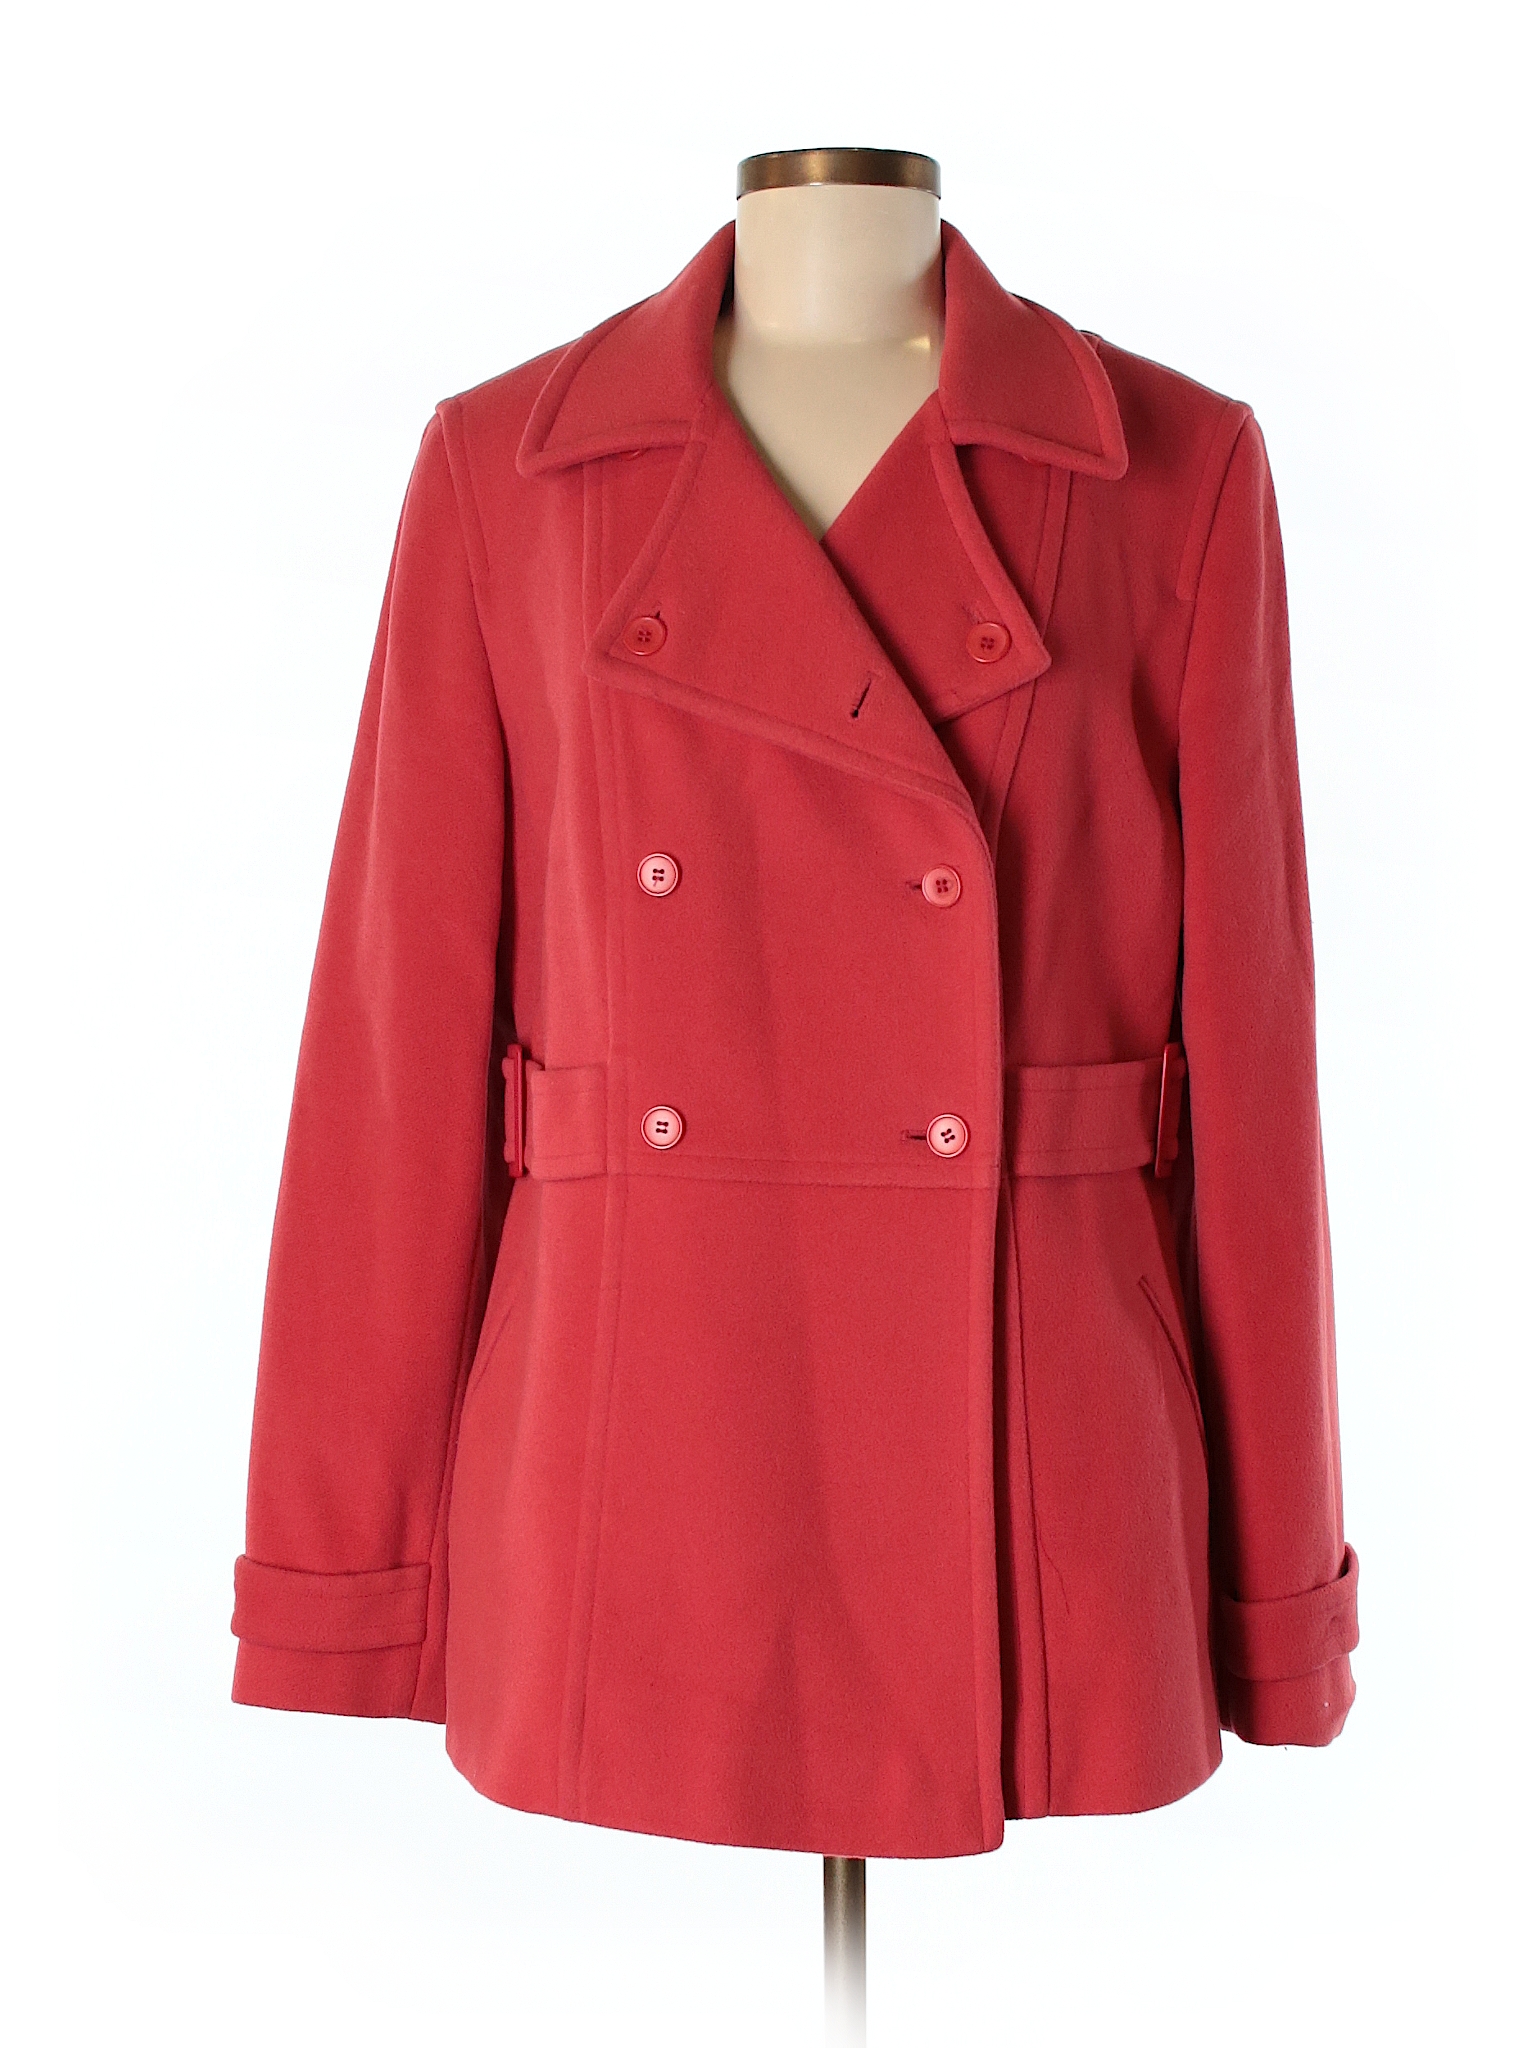 Ann Taylor LOFT Solid Red Wool Coat Size 12 - 87% off | thredUP